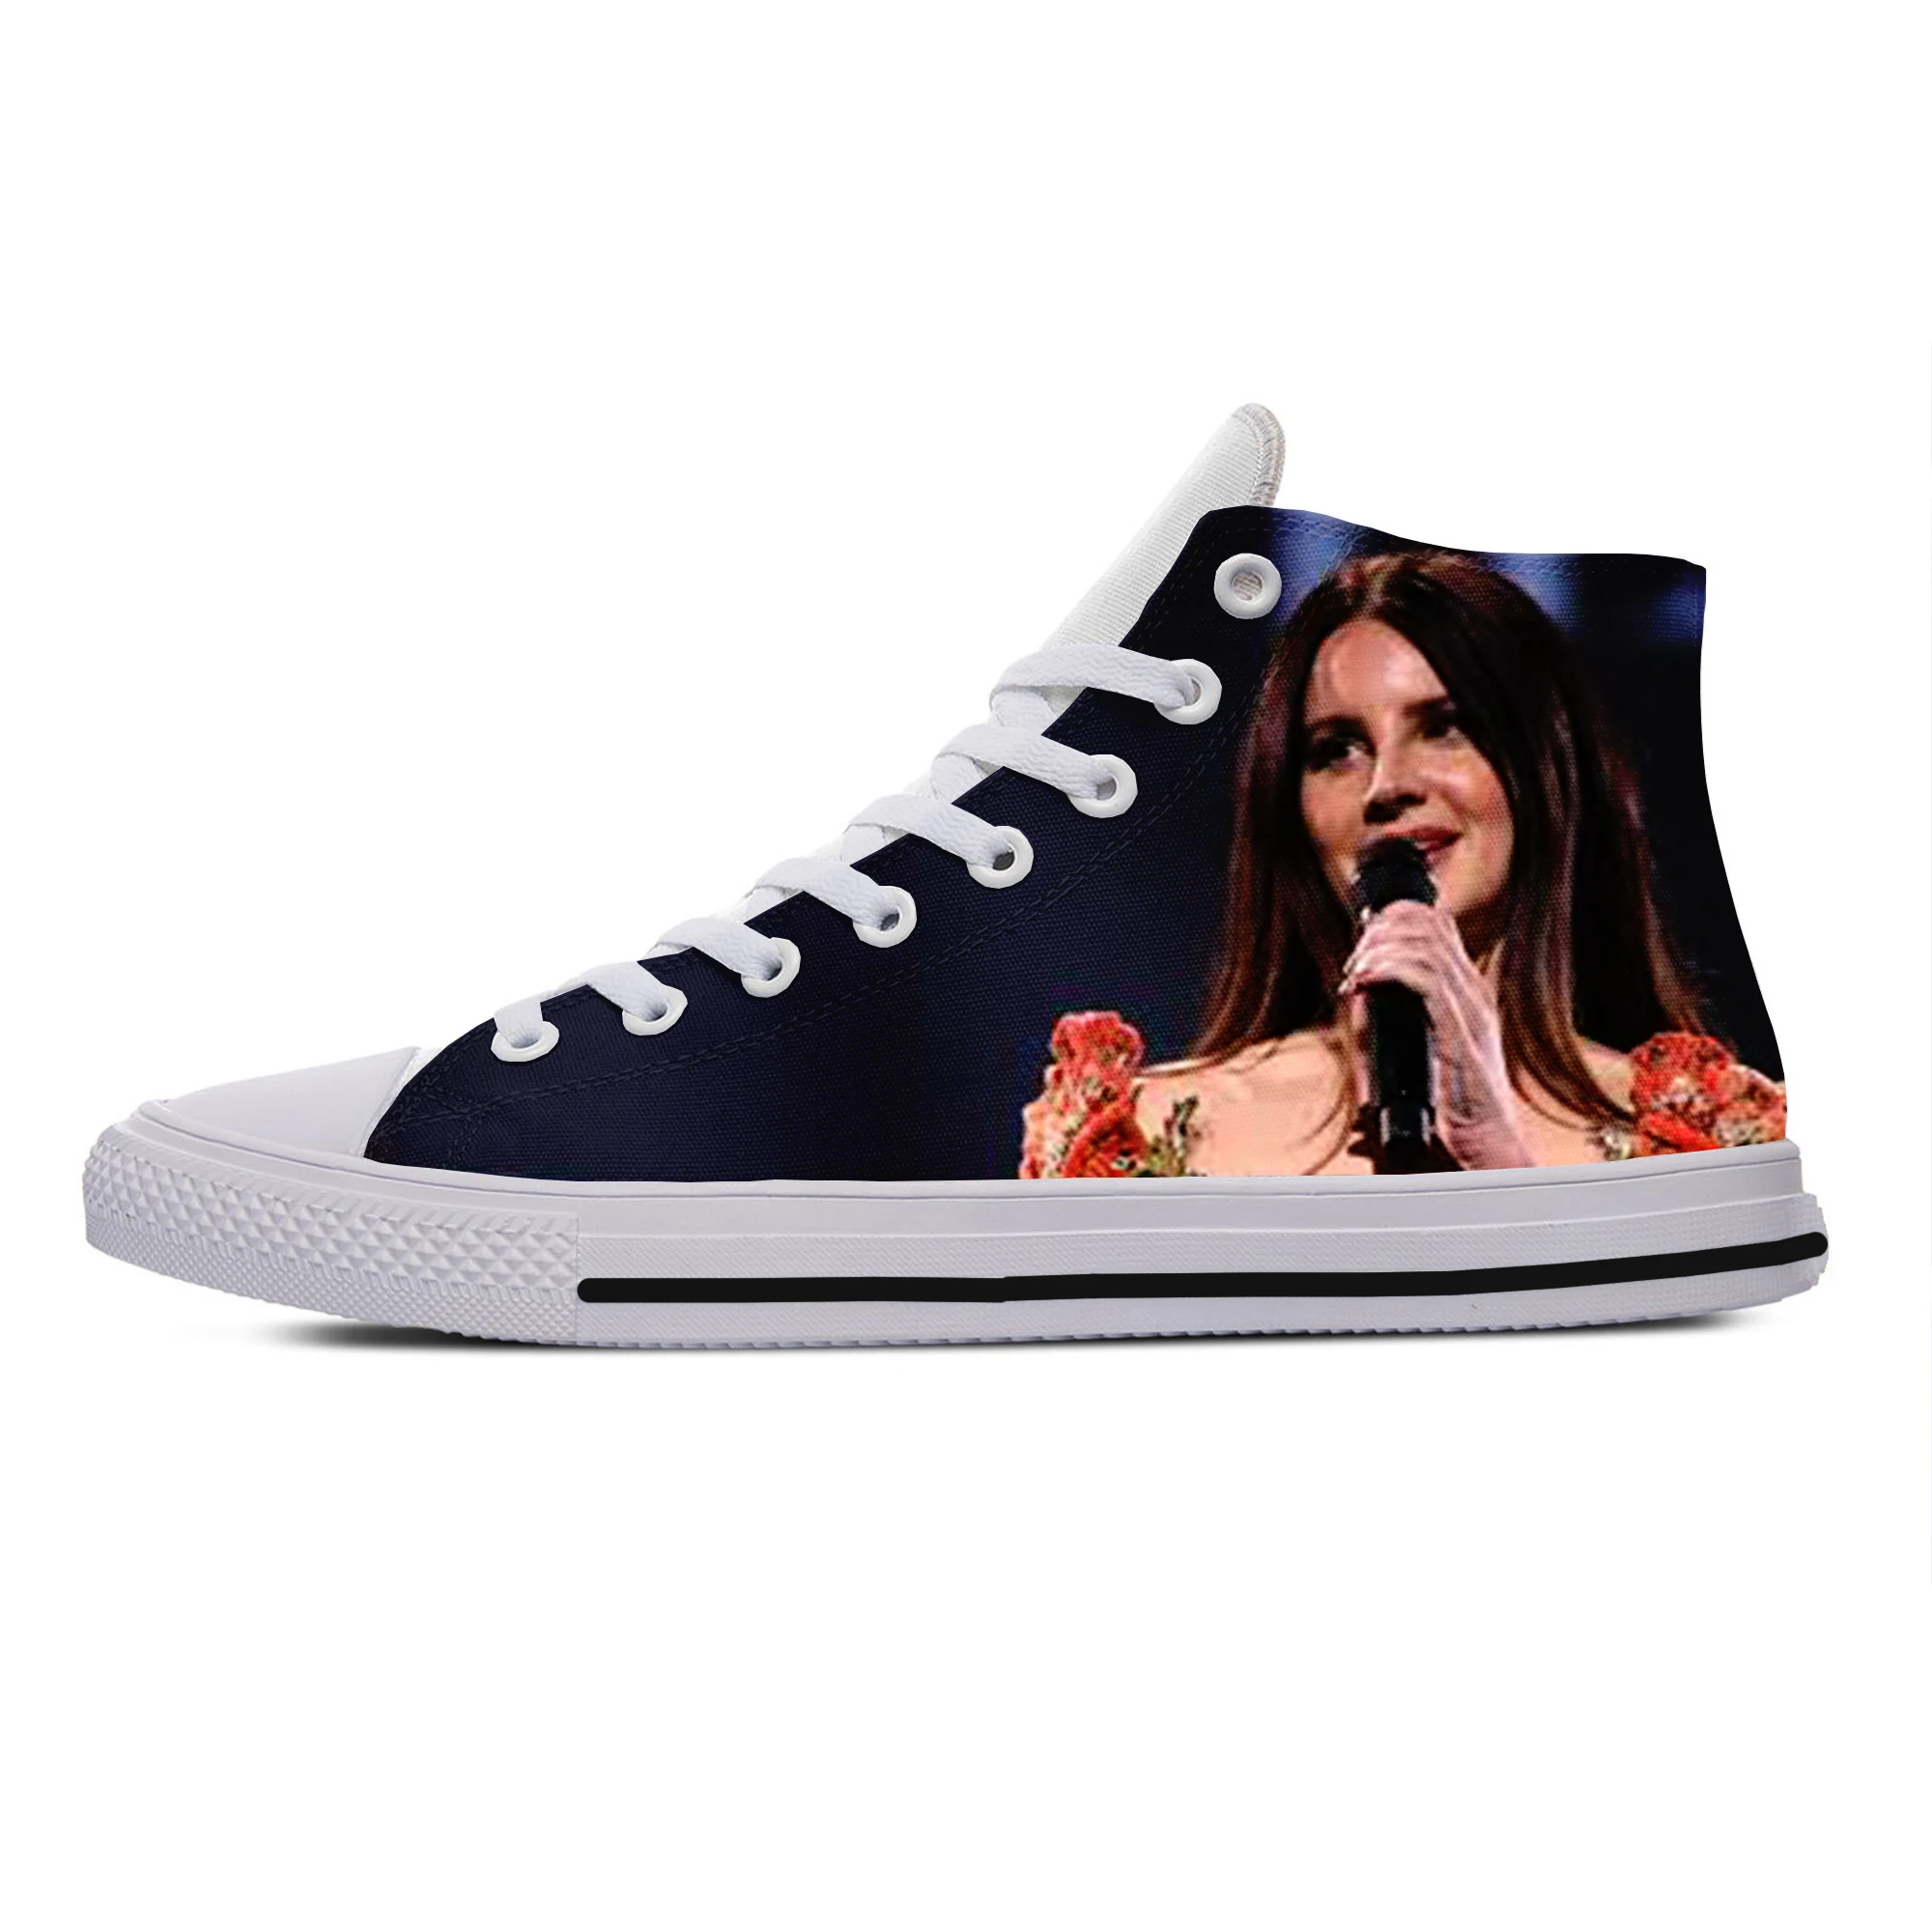 

2019 Hot Cool Fashion Pop Funny New Summer High Quality Sneakers Handiness Casual Shoes 3D Printed For Men Women Lana Del Rey